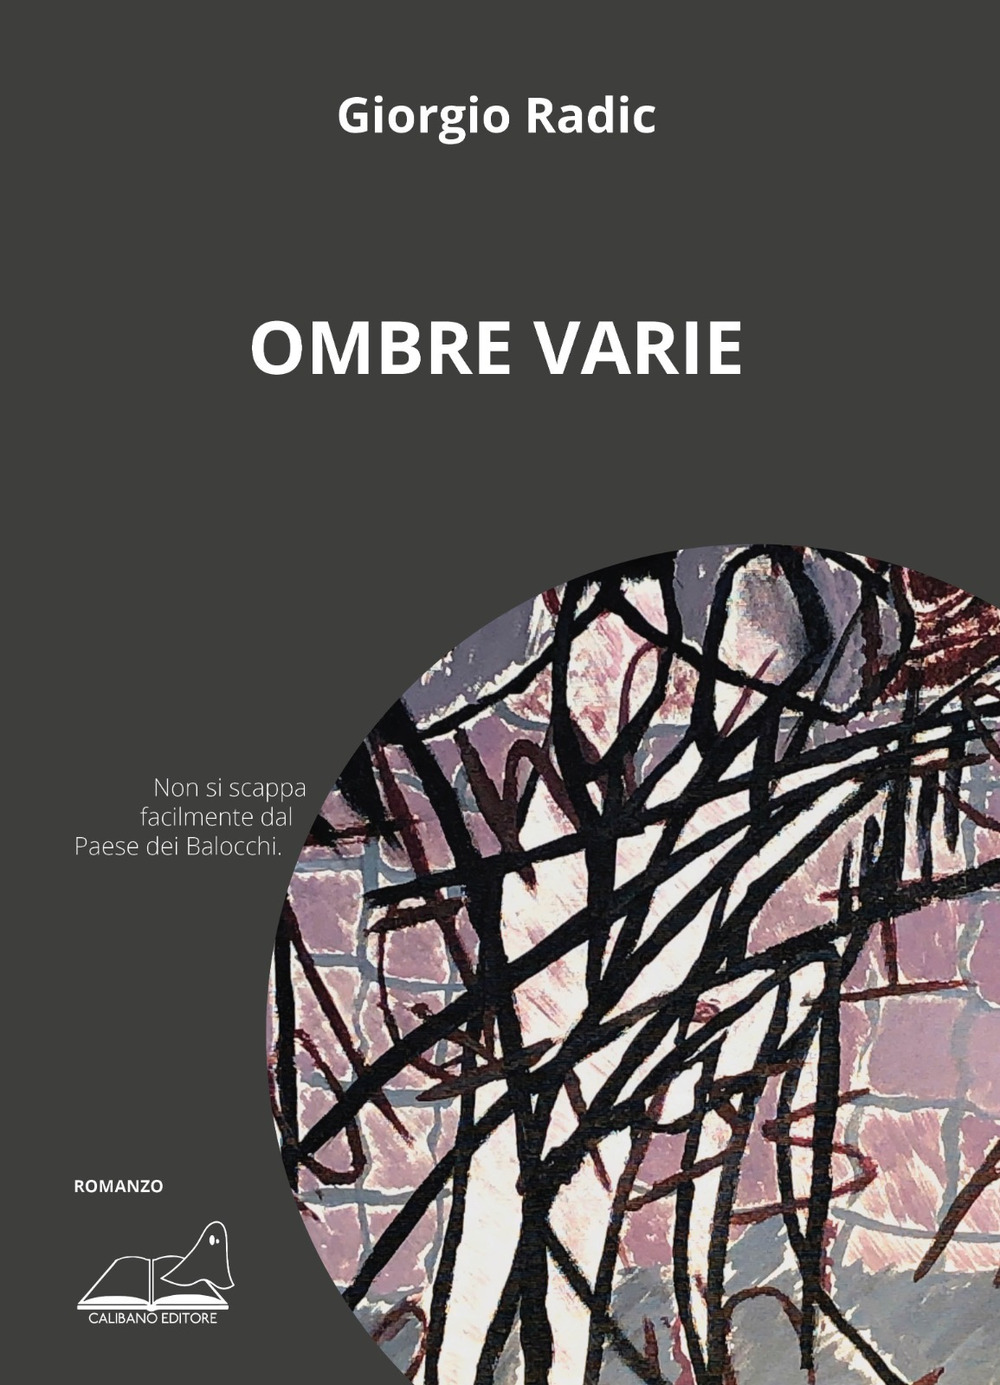 Ombre varie